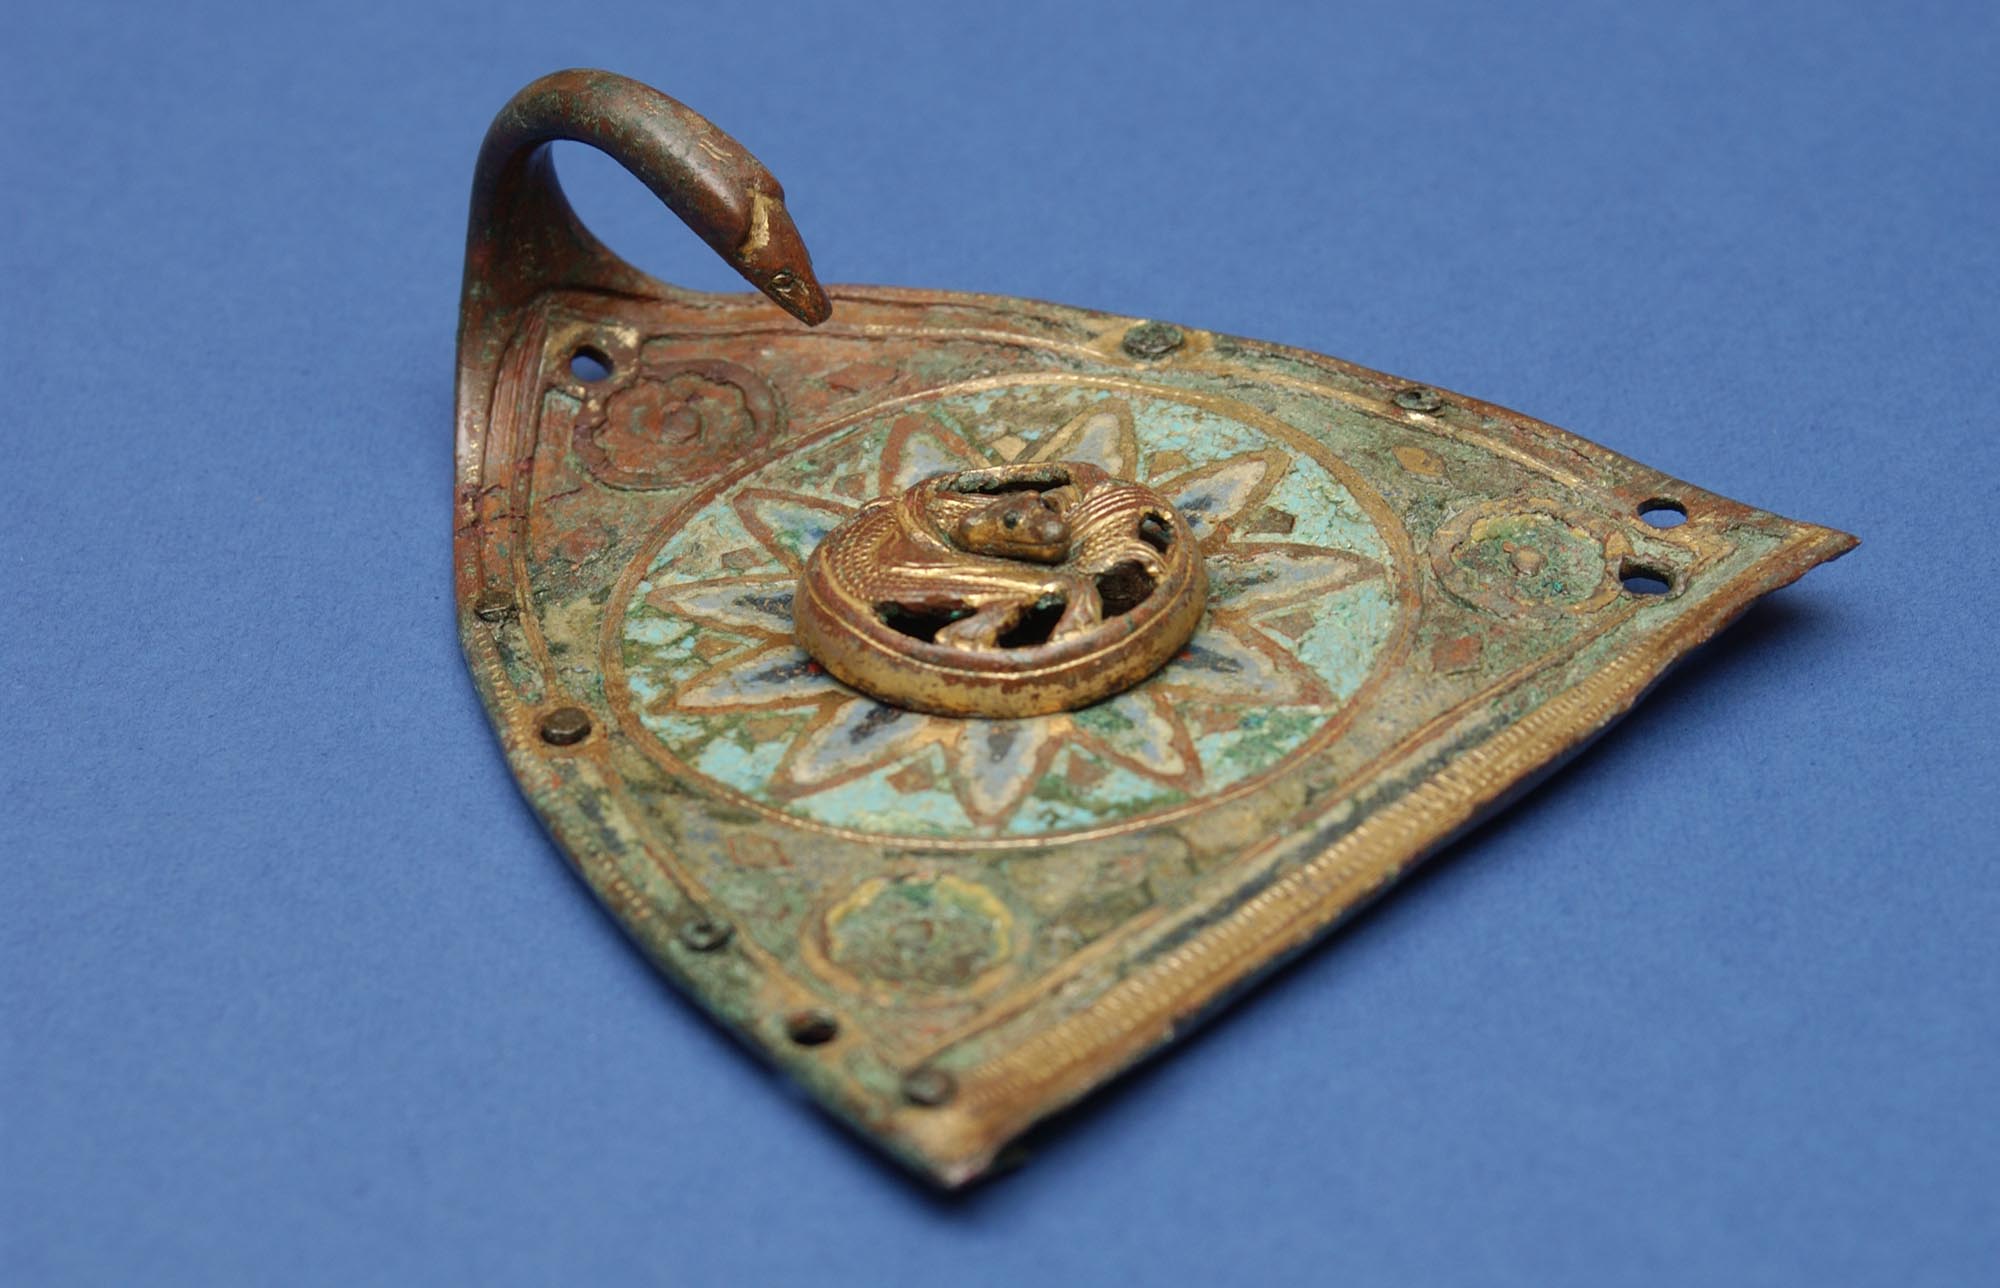 The hinged lid of a 13th-century Limoges enamel incense-boat, found in the sacristy at Leicester Abbey in 1930 -